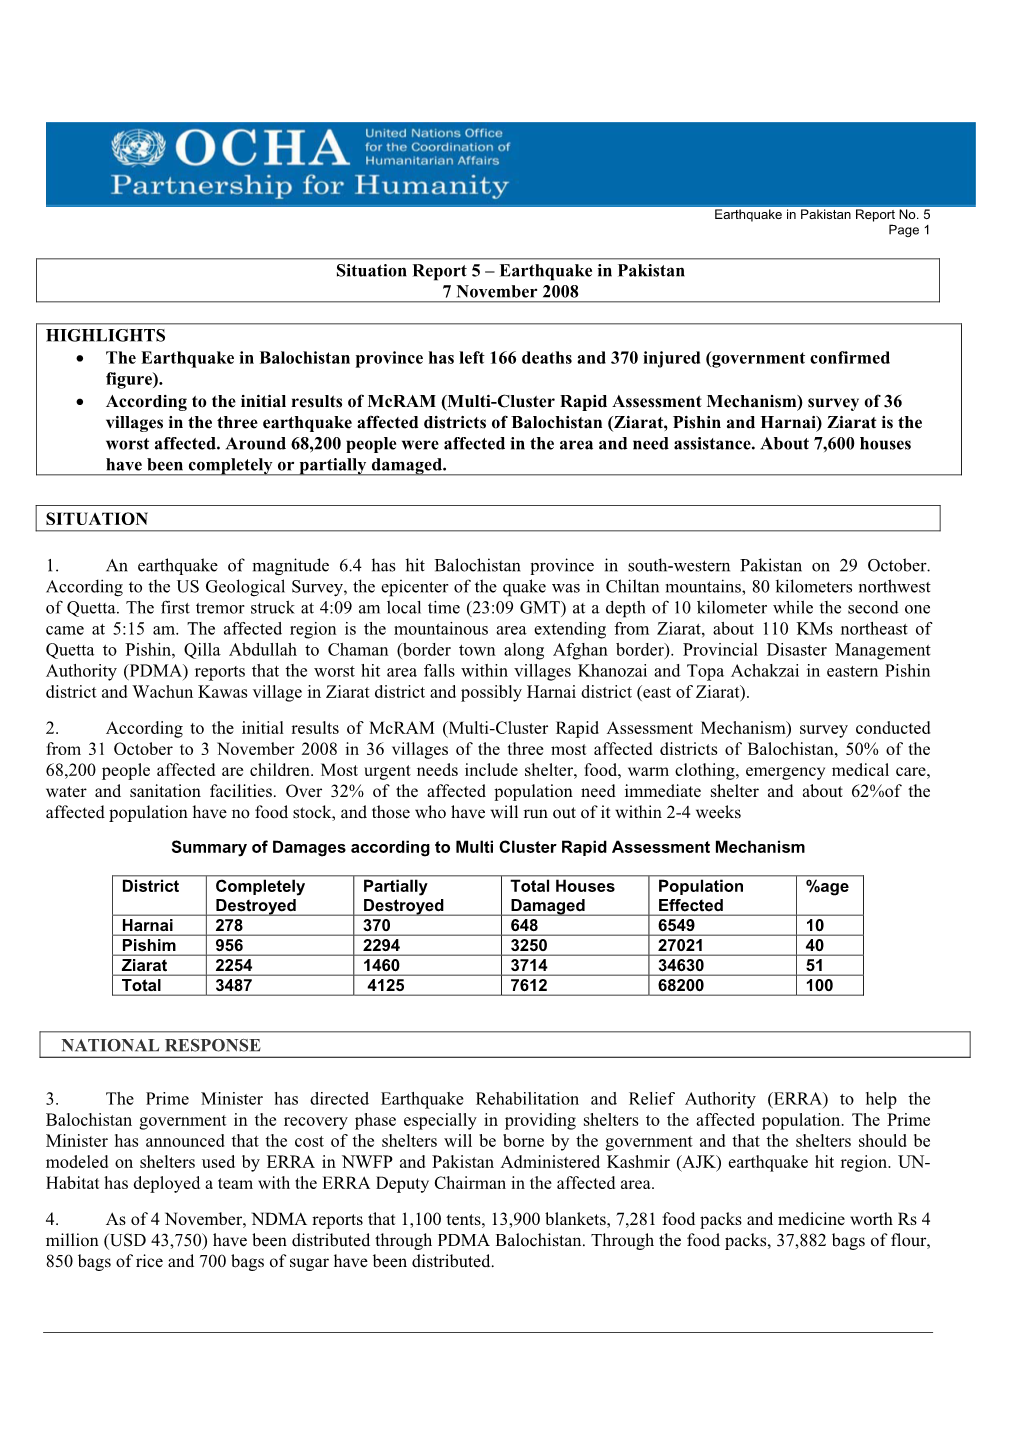 Situation Report 5 – Earthquake in Pakistan 7 November 2008